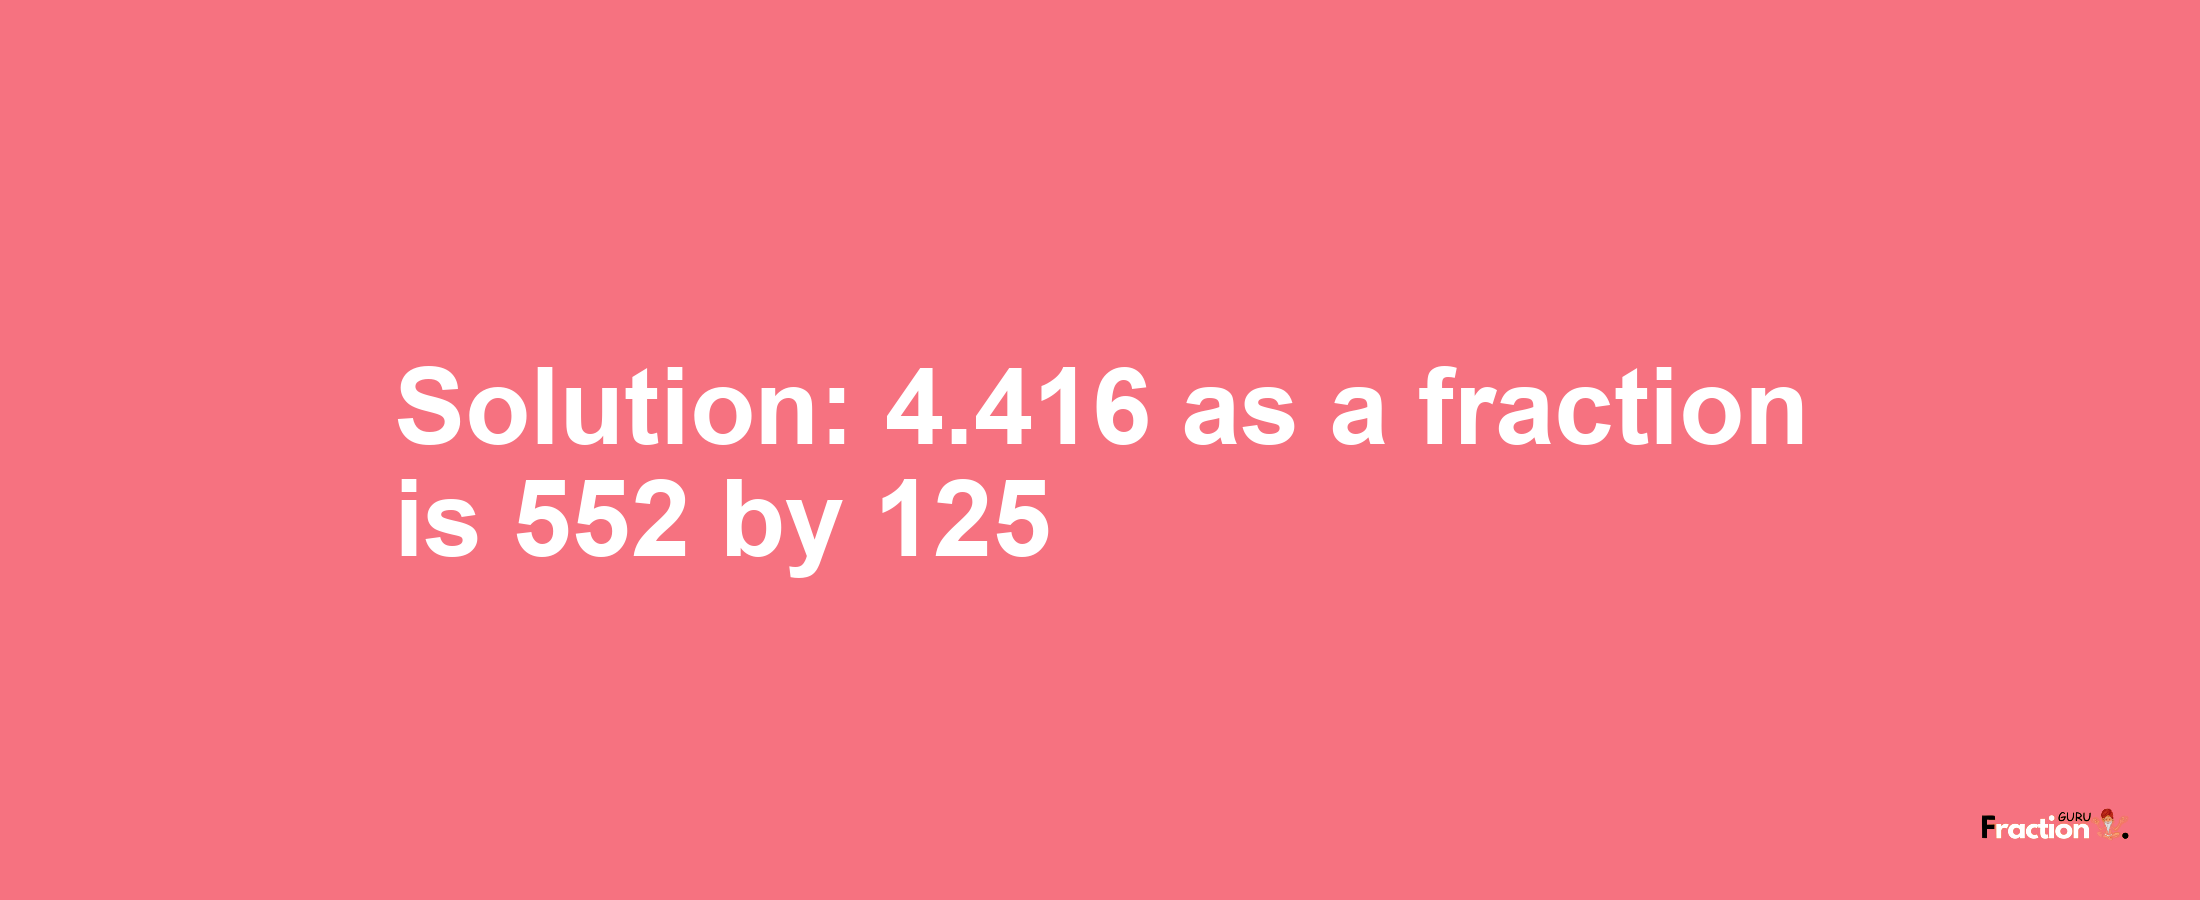 Solution:4.416 as a fraction is 552/125